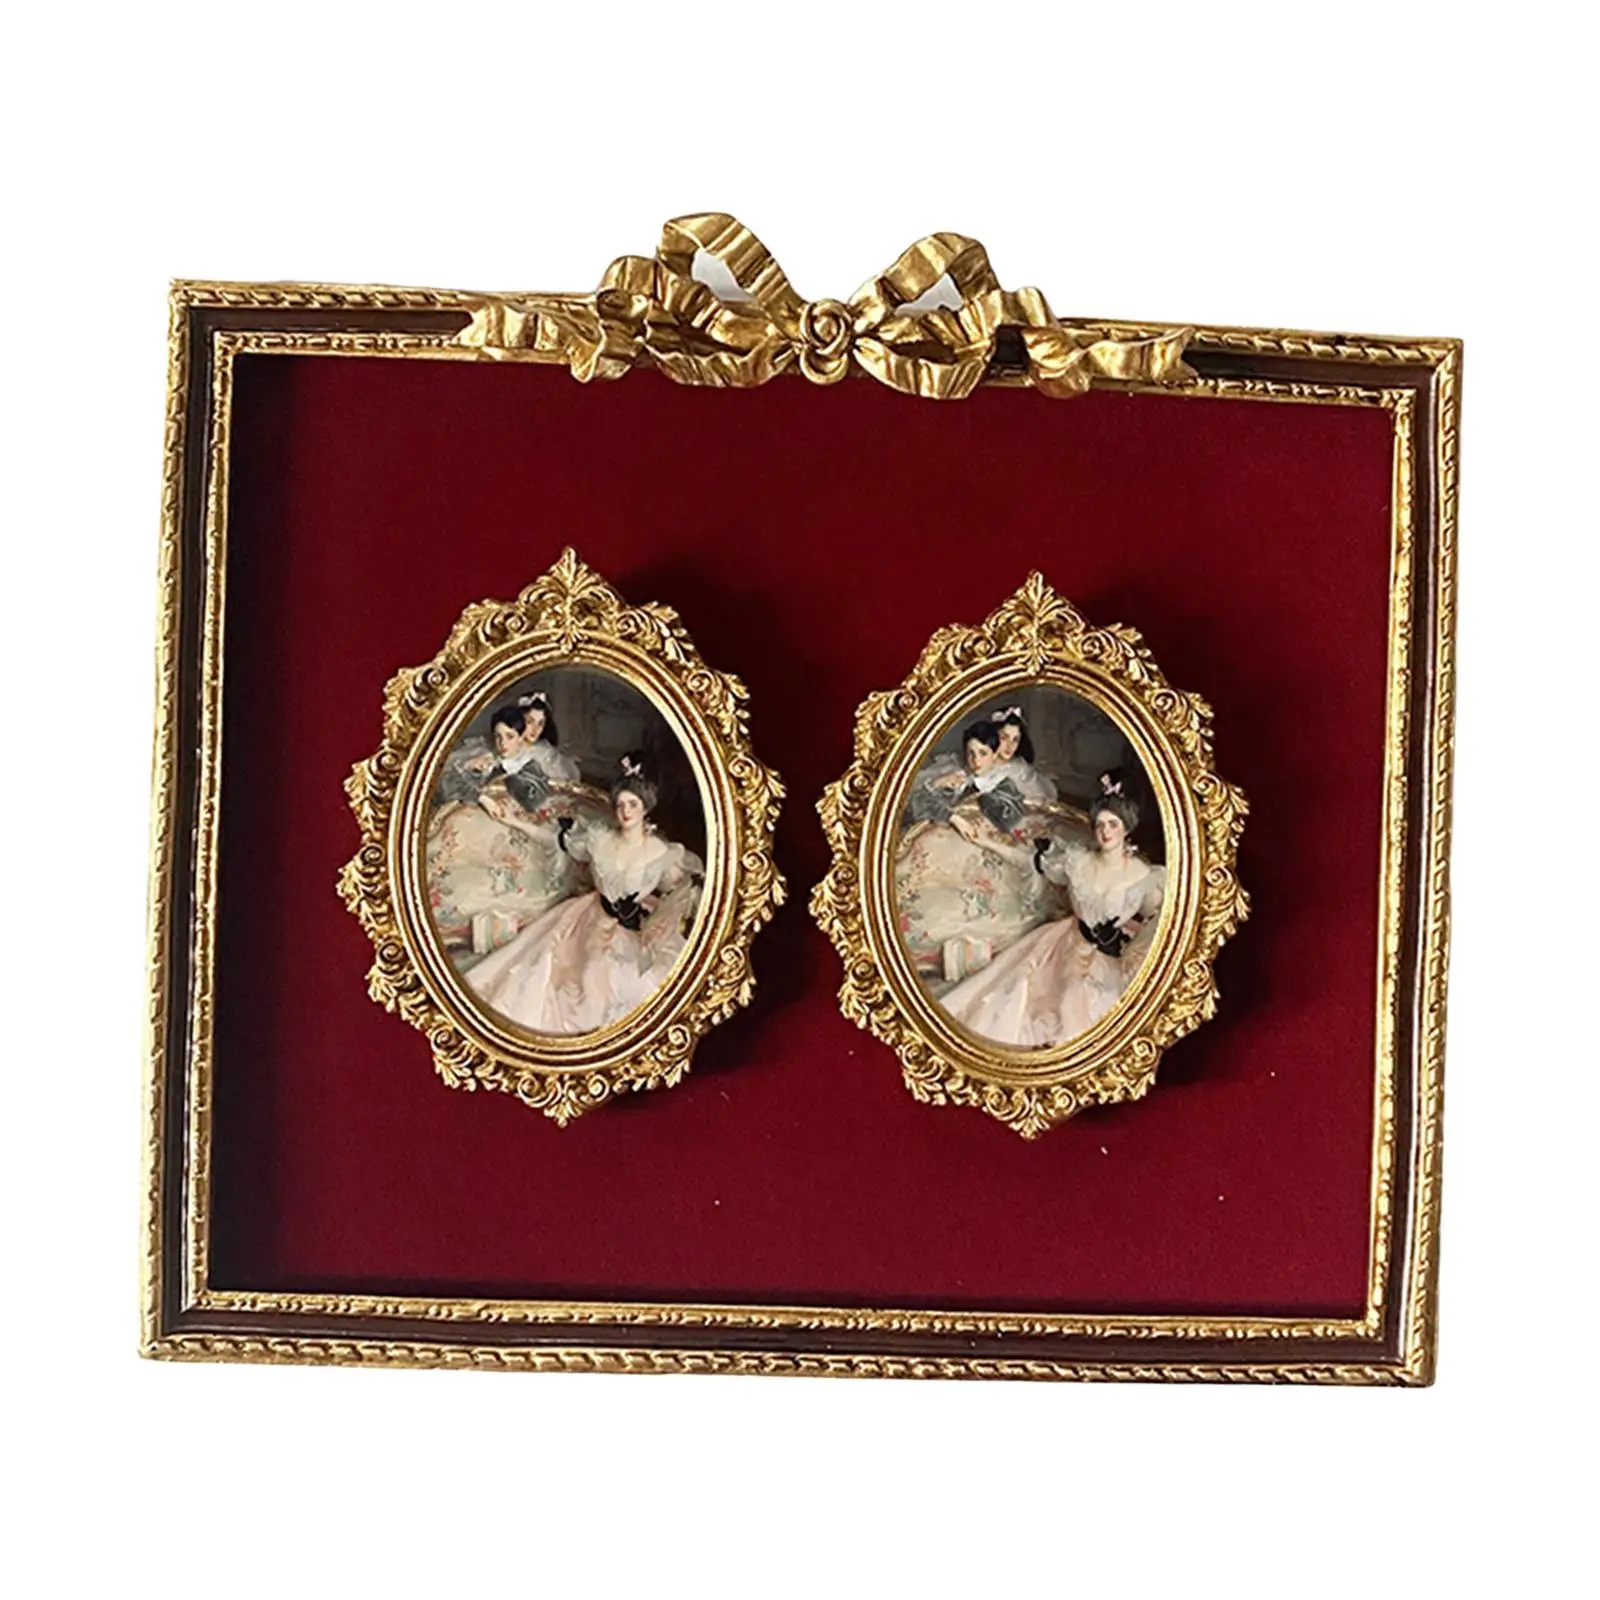 Photo Frame Hanging Resin Resin Picture Frame Wedding Ornament Display Frame Office Gift Antique Photo Frame Vintage Photo Frame